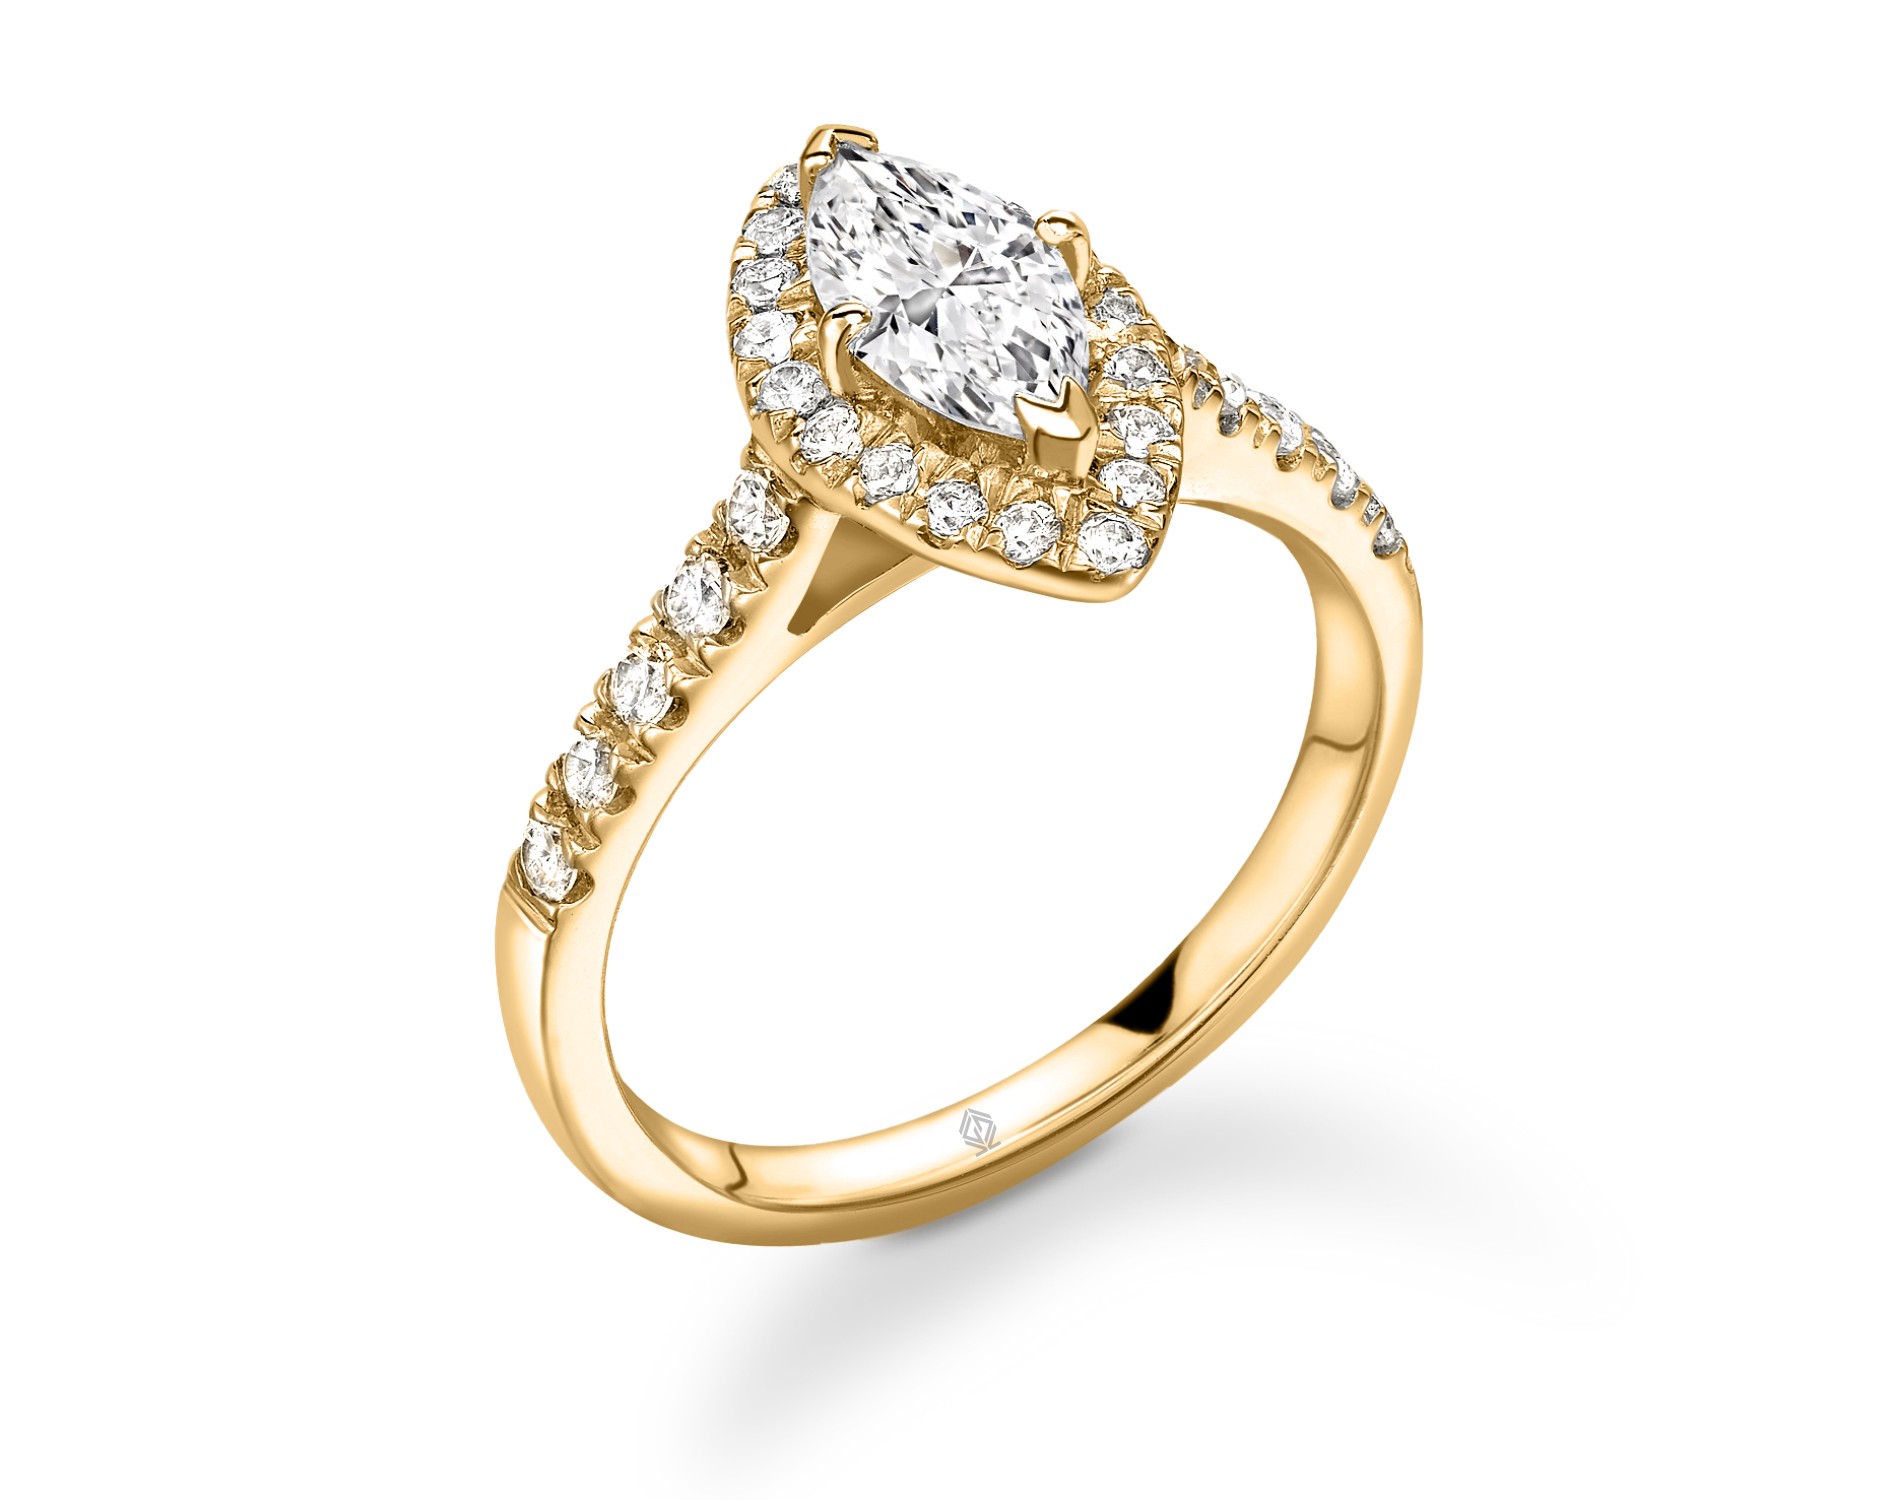 18K YELLOW GOLD HALO MARQUISE CUT DIAMOND ENGAGEMENT RING WITH SIDE STONES PAVE SET